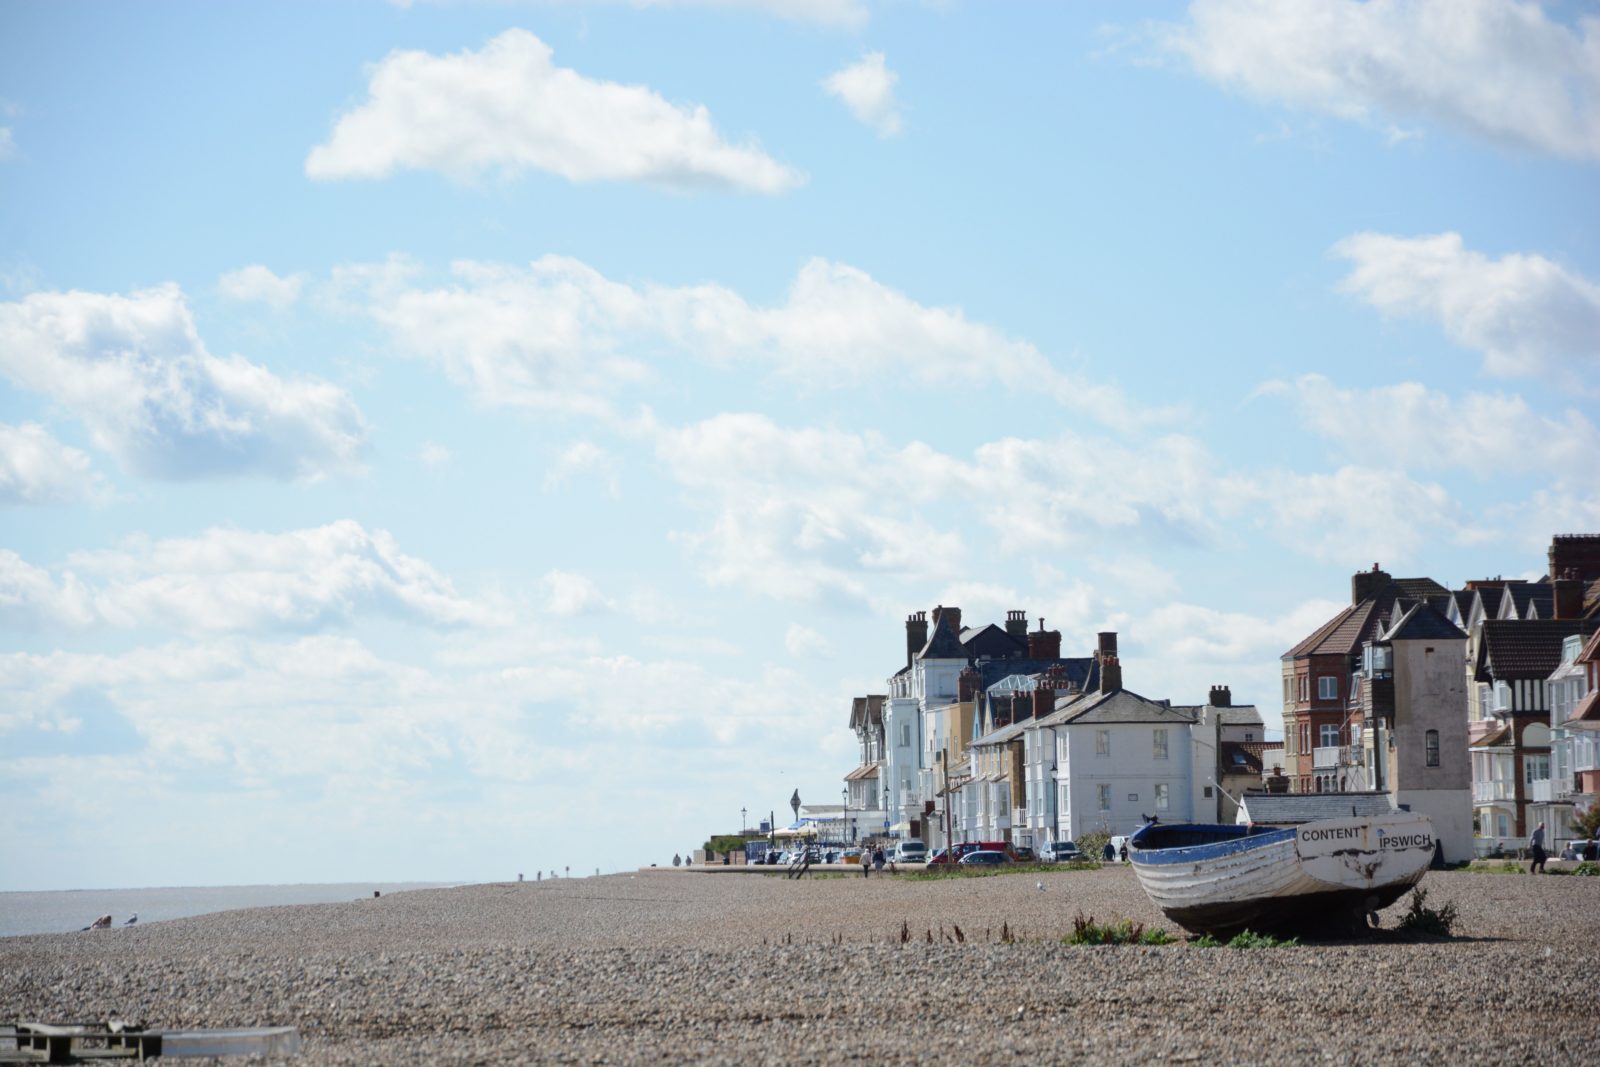 The beach front of Aldeburgh